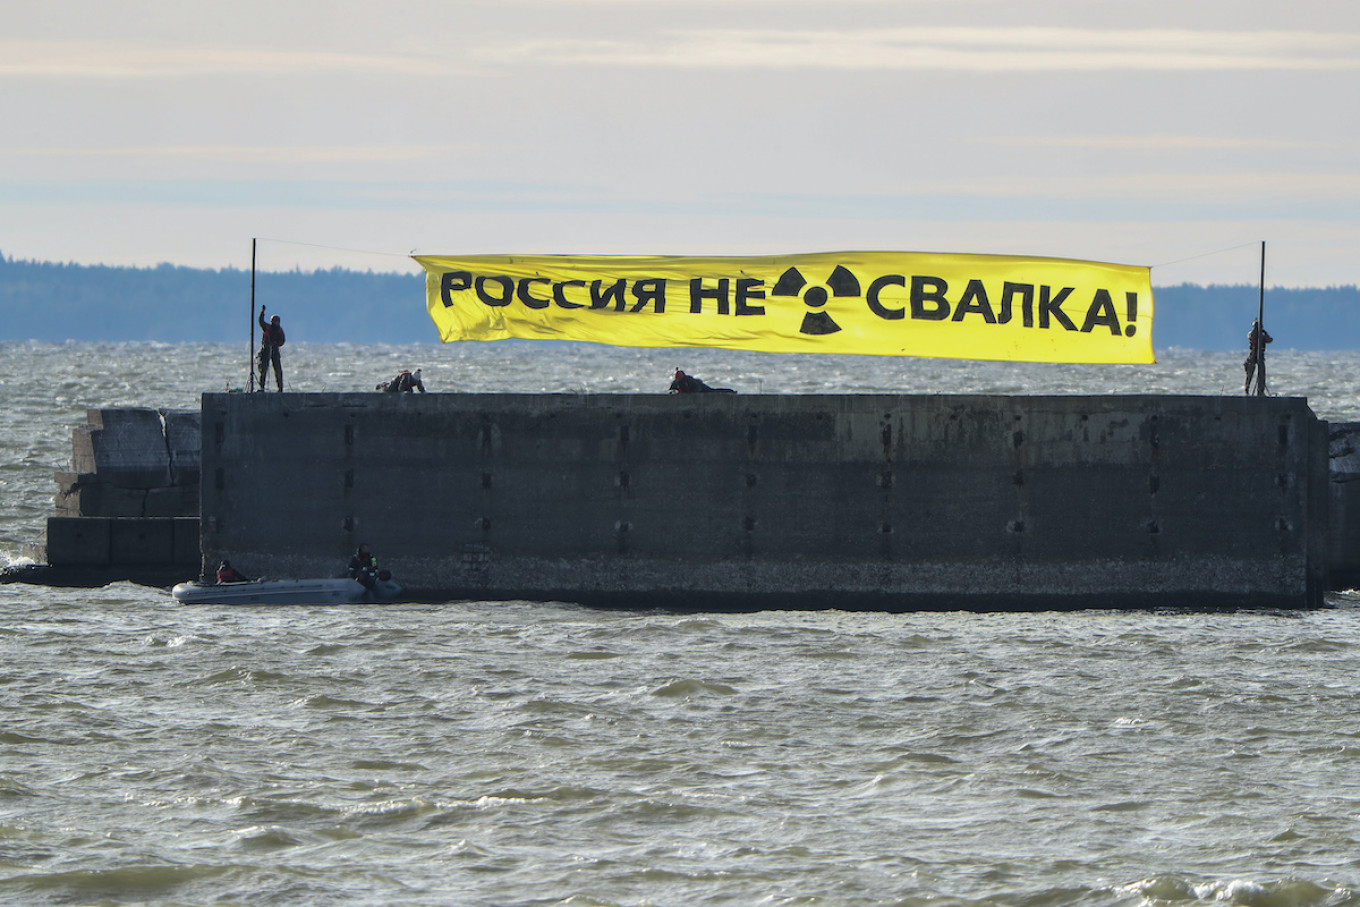 Russia’s Nuclear Imports Likely Larger Than Declared – Greenpeace